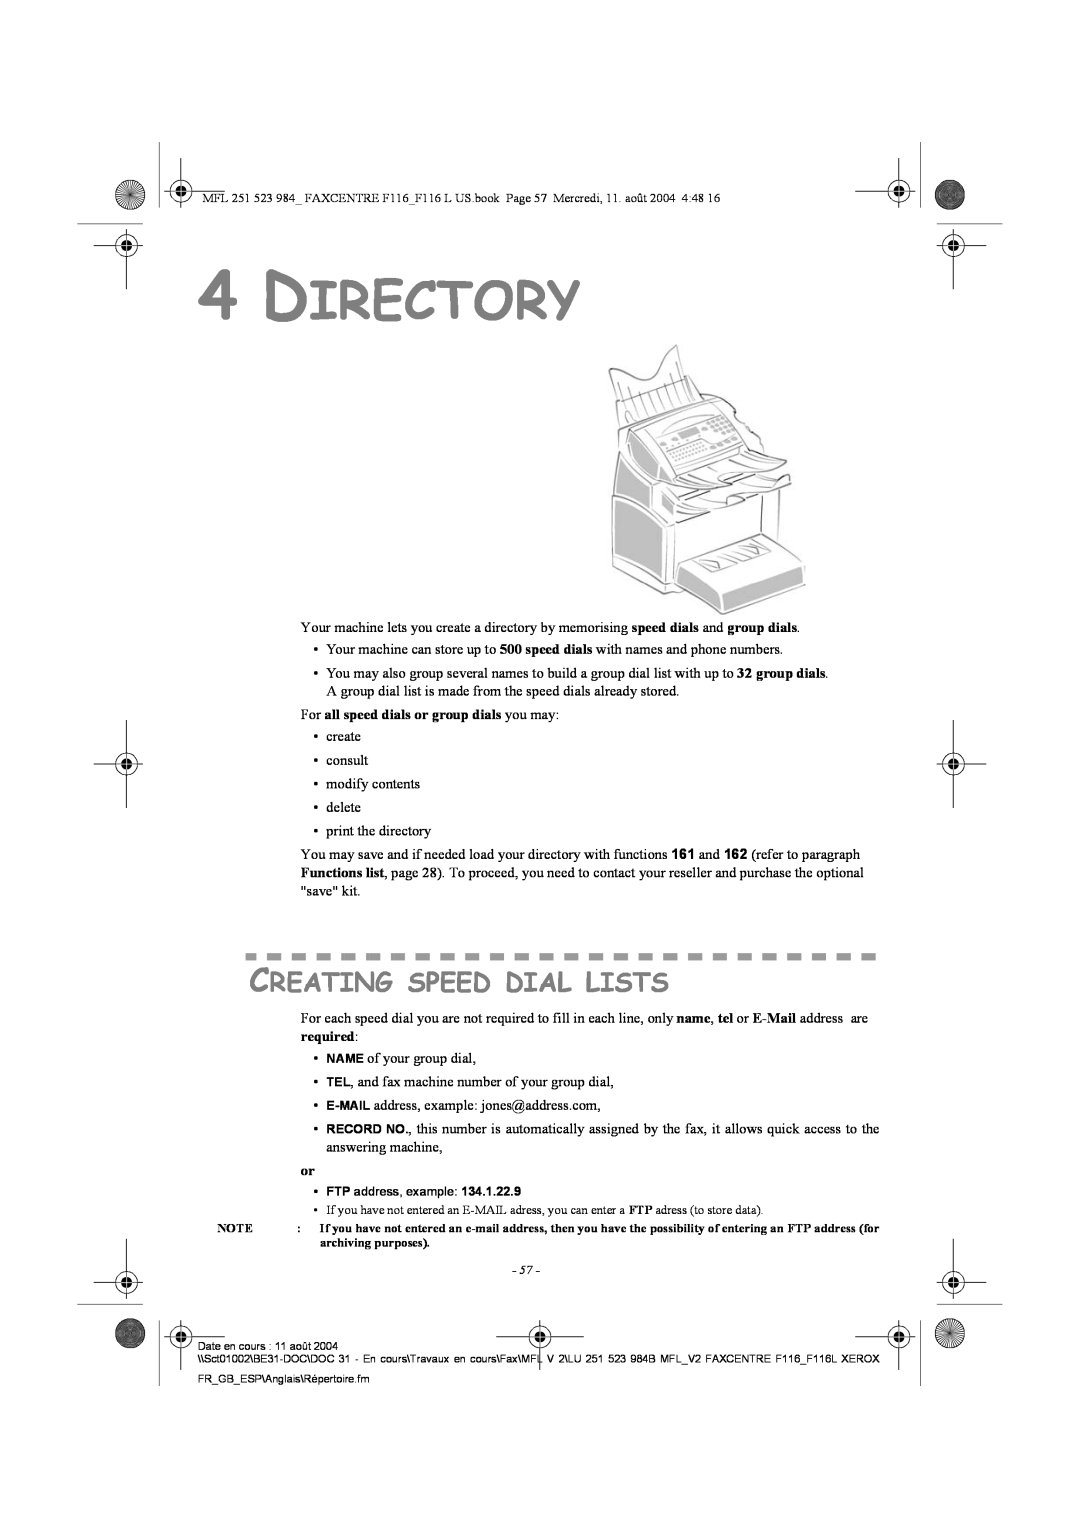 Xerox F116 user manual 4DIRECTORY, Creating Speed Dial Lists, For all speed dials or group dials you may 